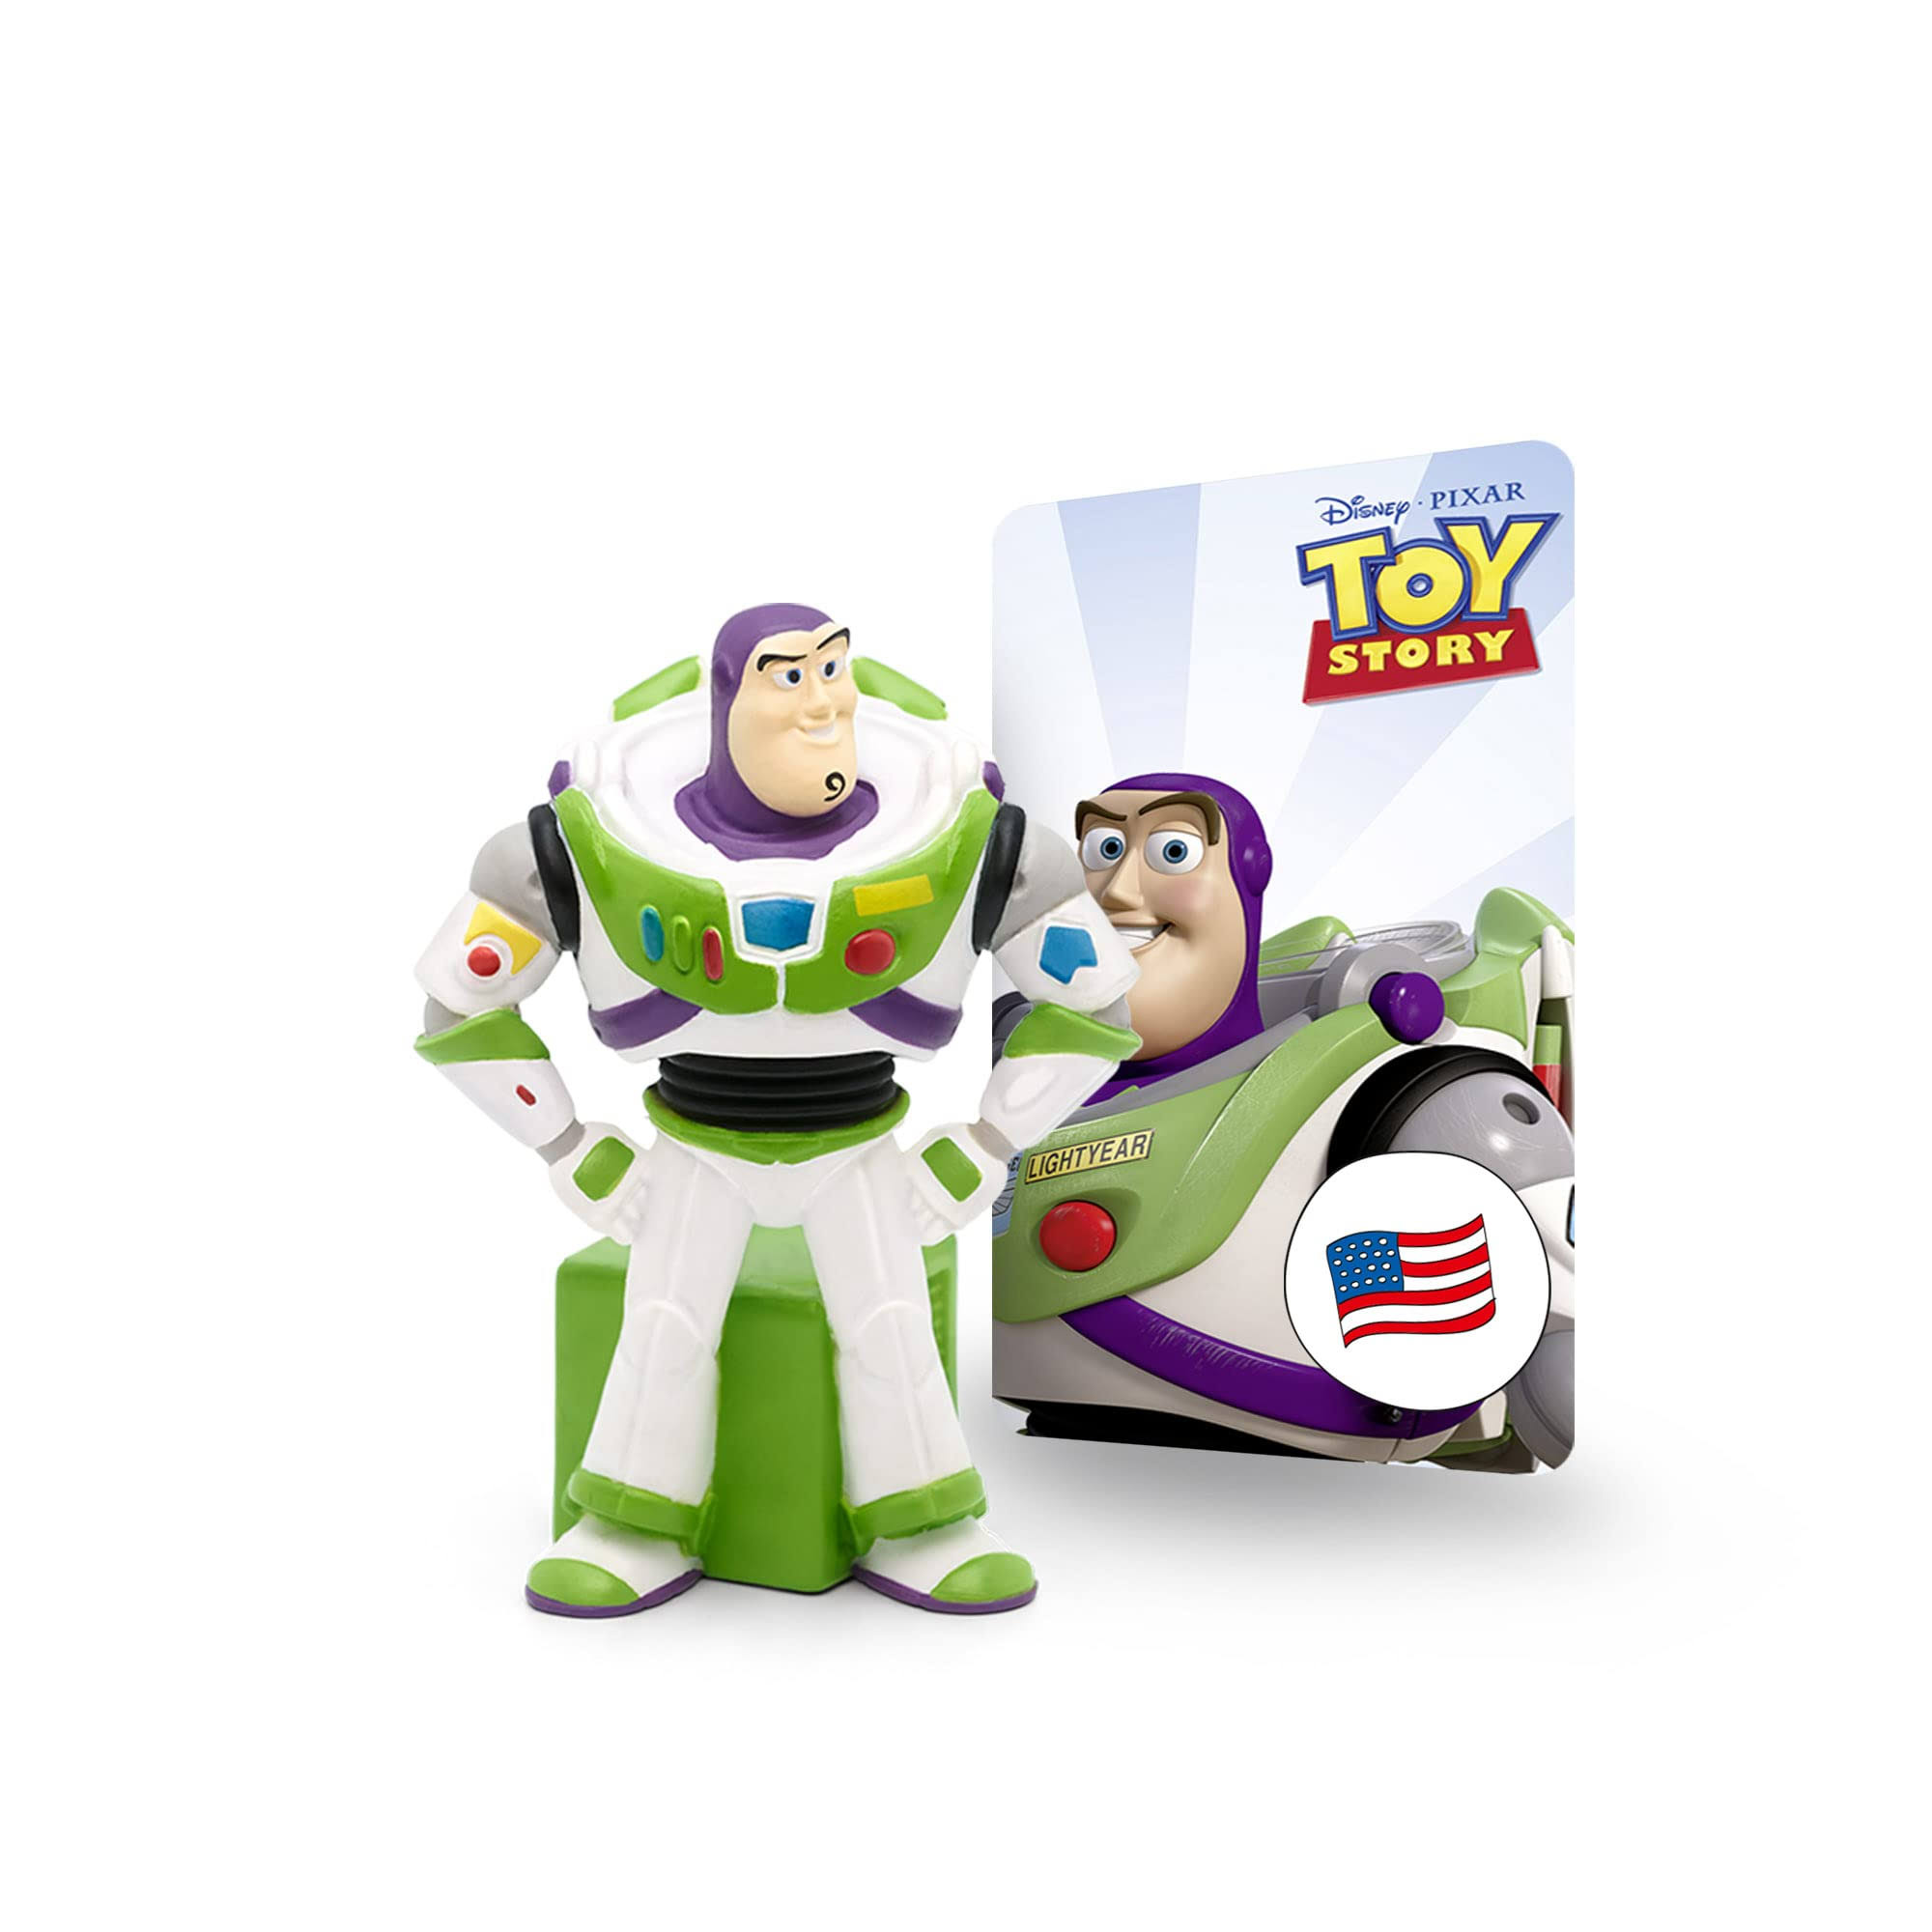 Tonies Buzz Lightyear Audio Play Character from Disney's Toy Story 2